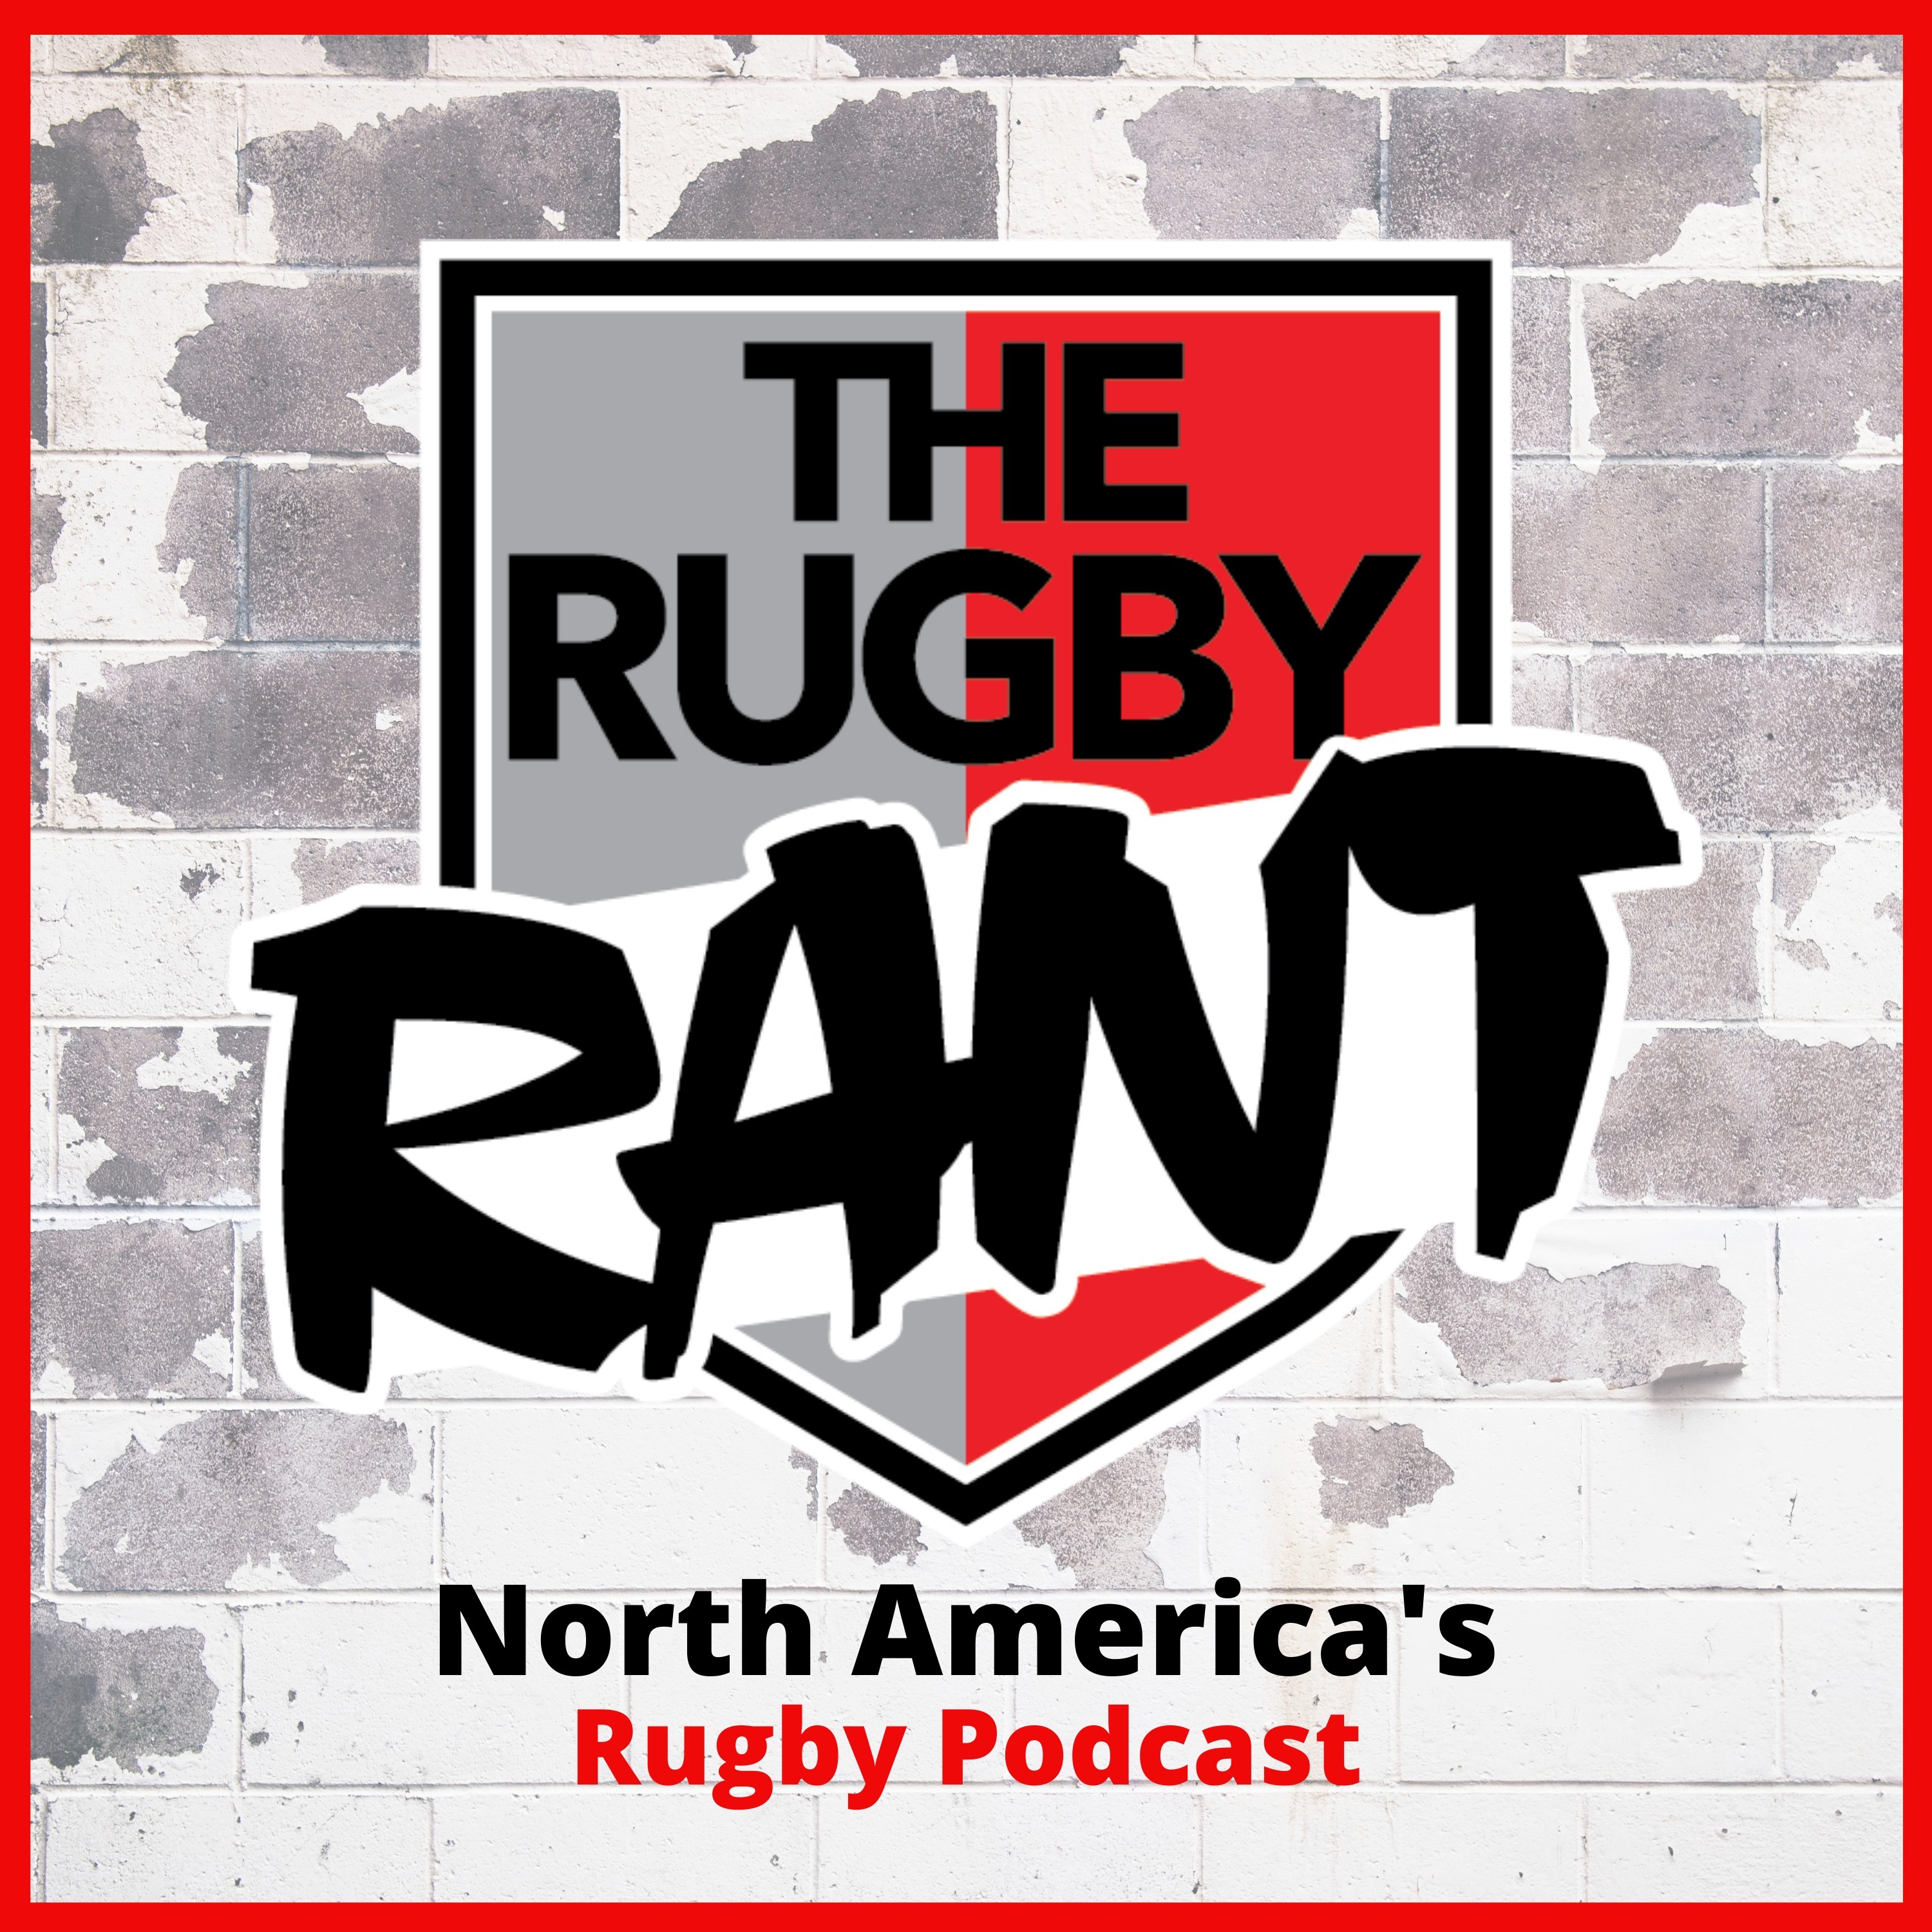 The Rugby Rant - Run, Pass or Kick with Kate Zachary